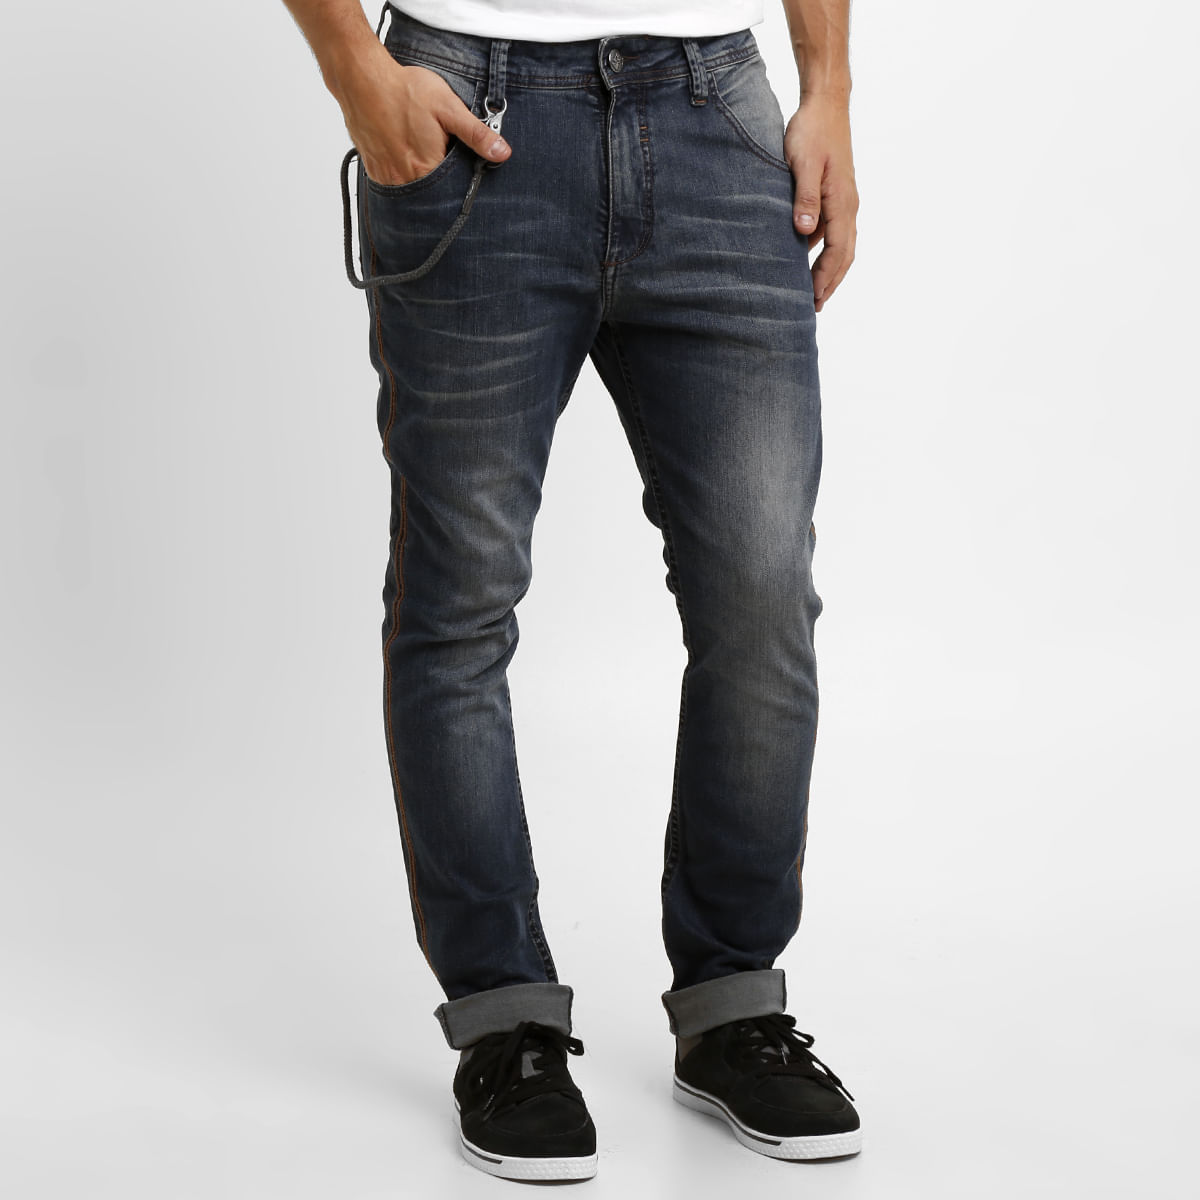 ink jeans denim collection